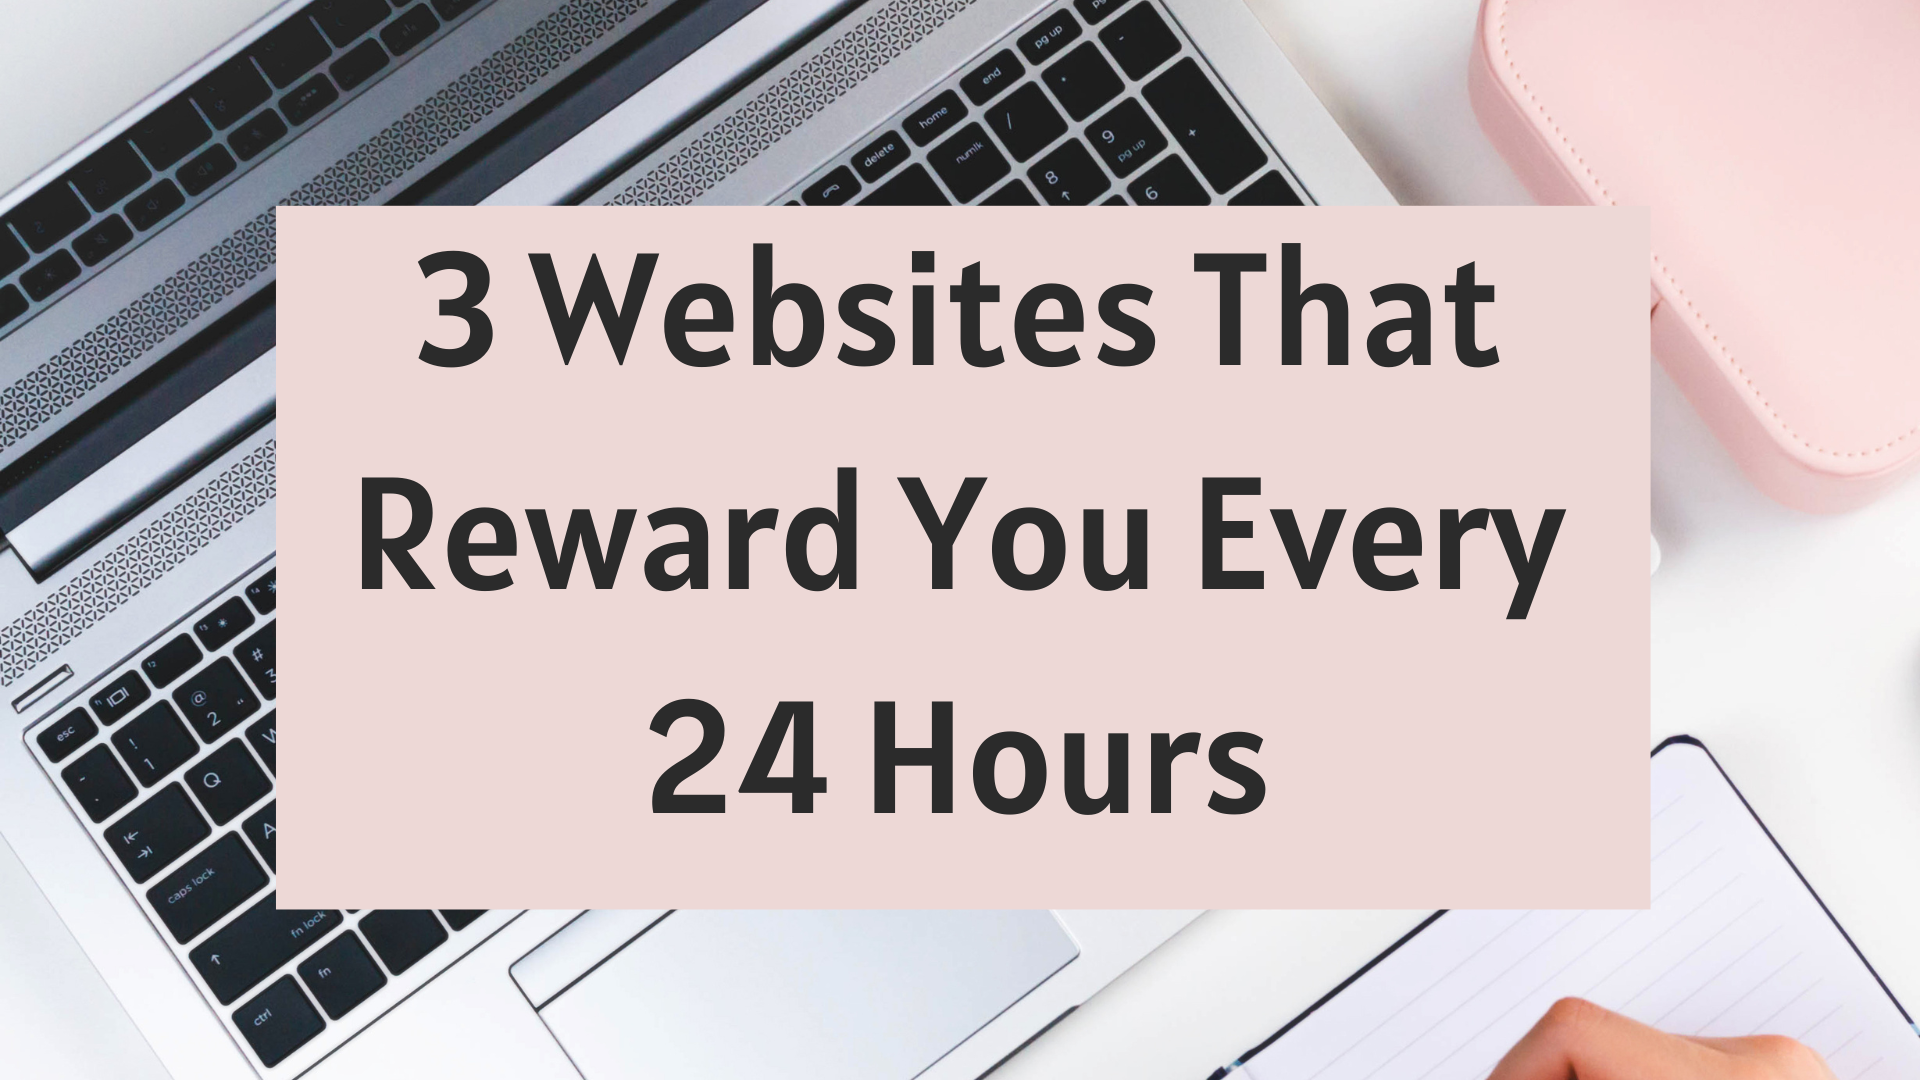 3 Websites That Reward You Every 24 Hours